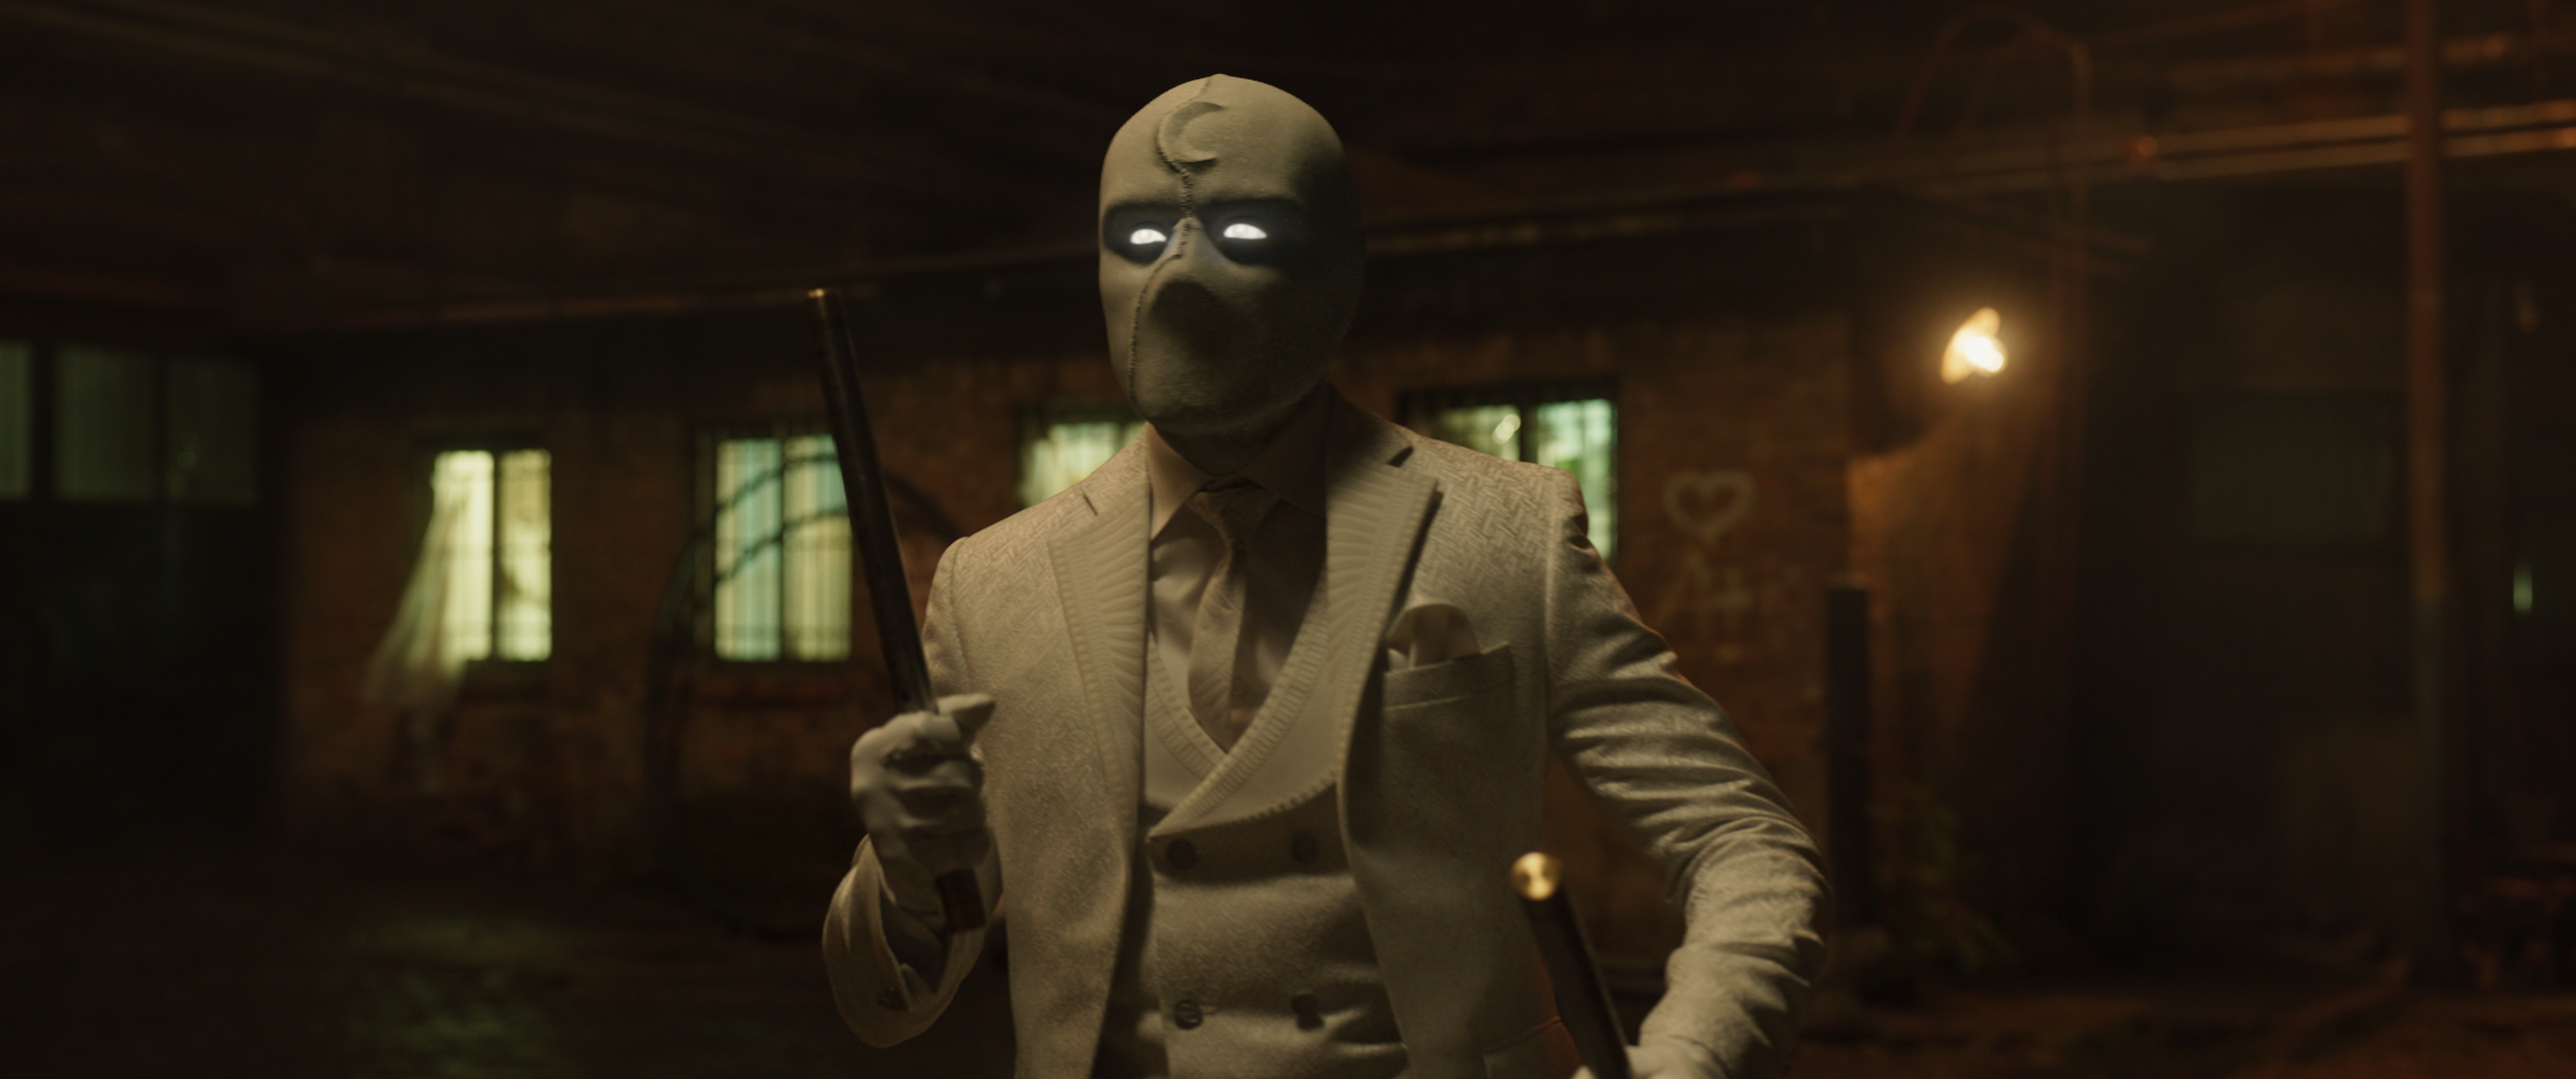 Moon Knight Season 2 Release Date Rumors: Is It Coming Out?